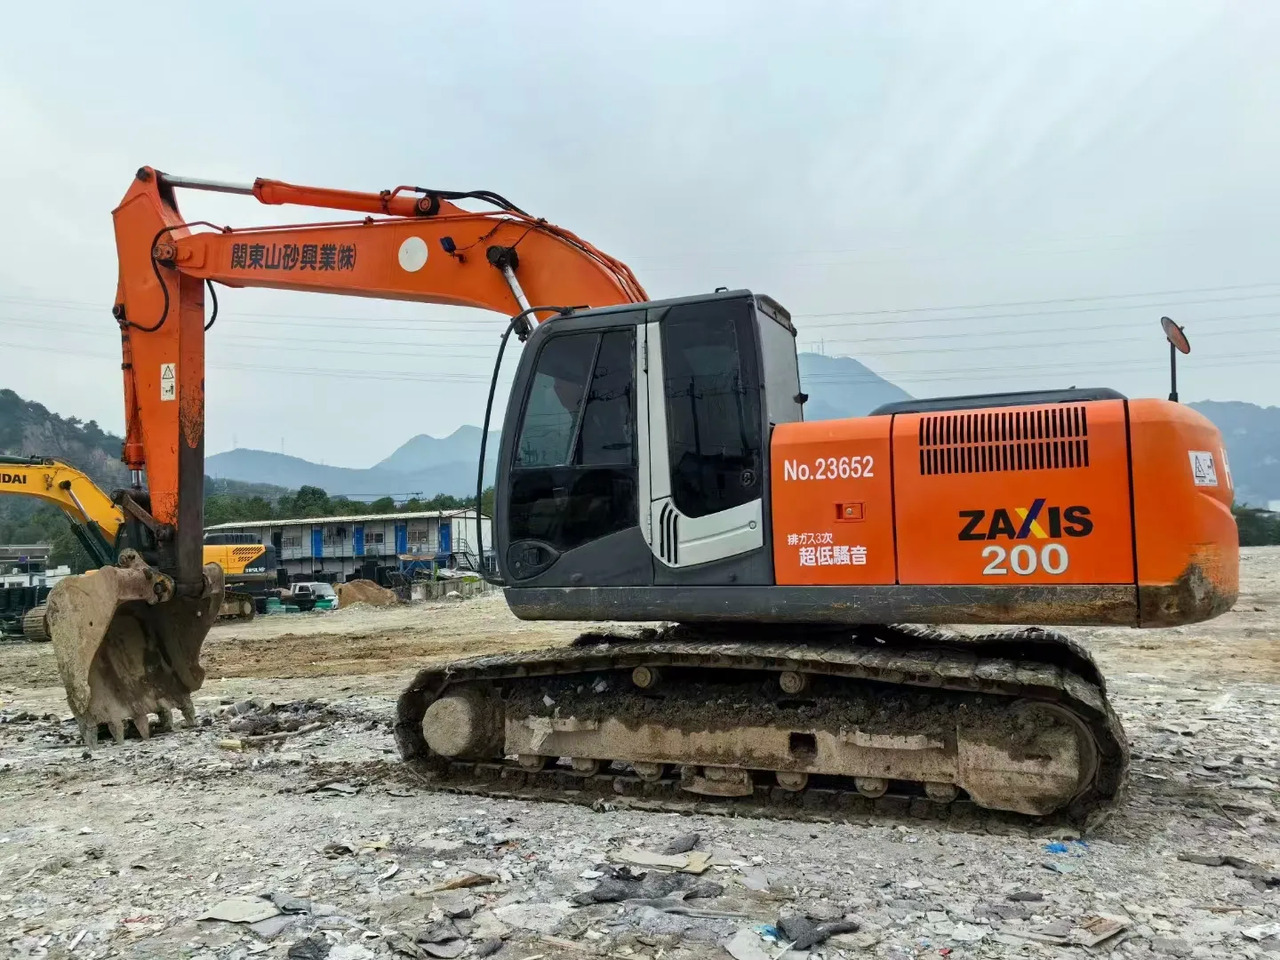 Crawler excavator Second hand hitachi zx200 excavator zx200-3g zx200-5g 20 ton used excavator in china yard for sale: picture 5